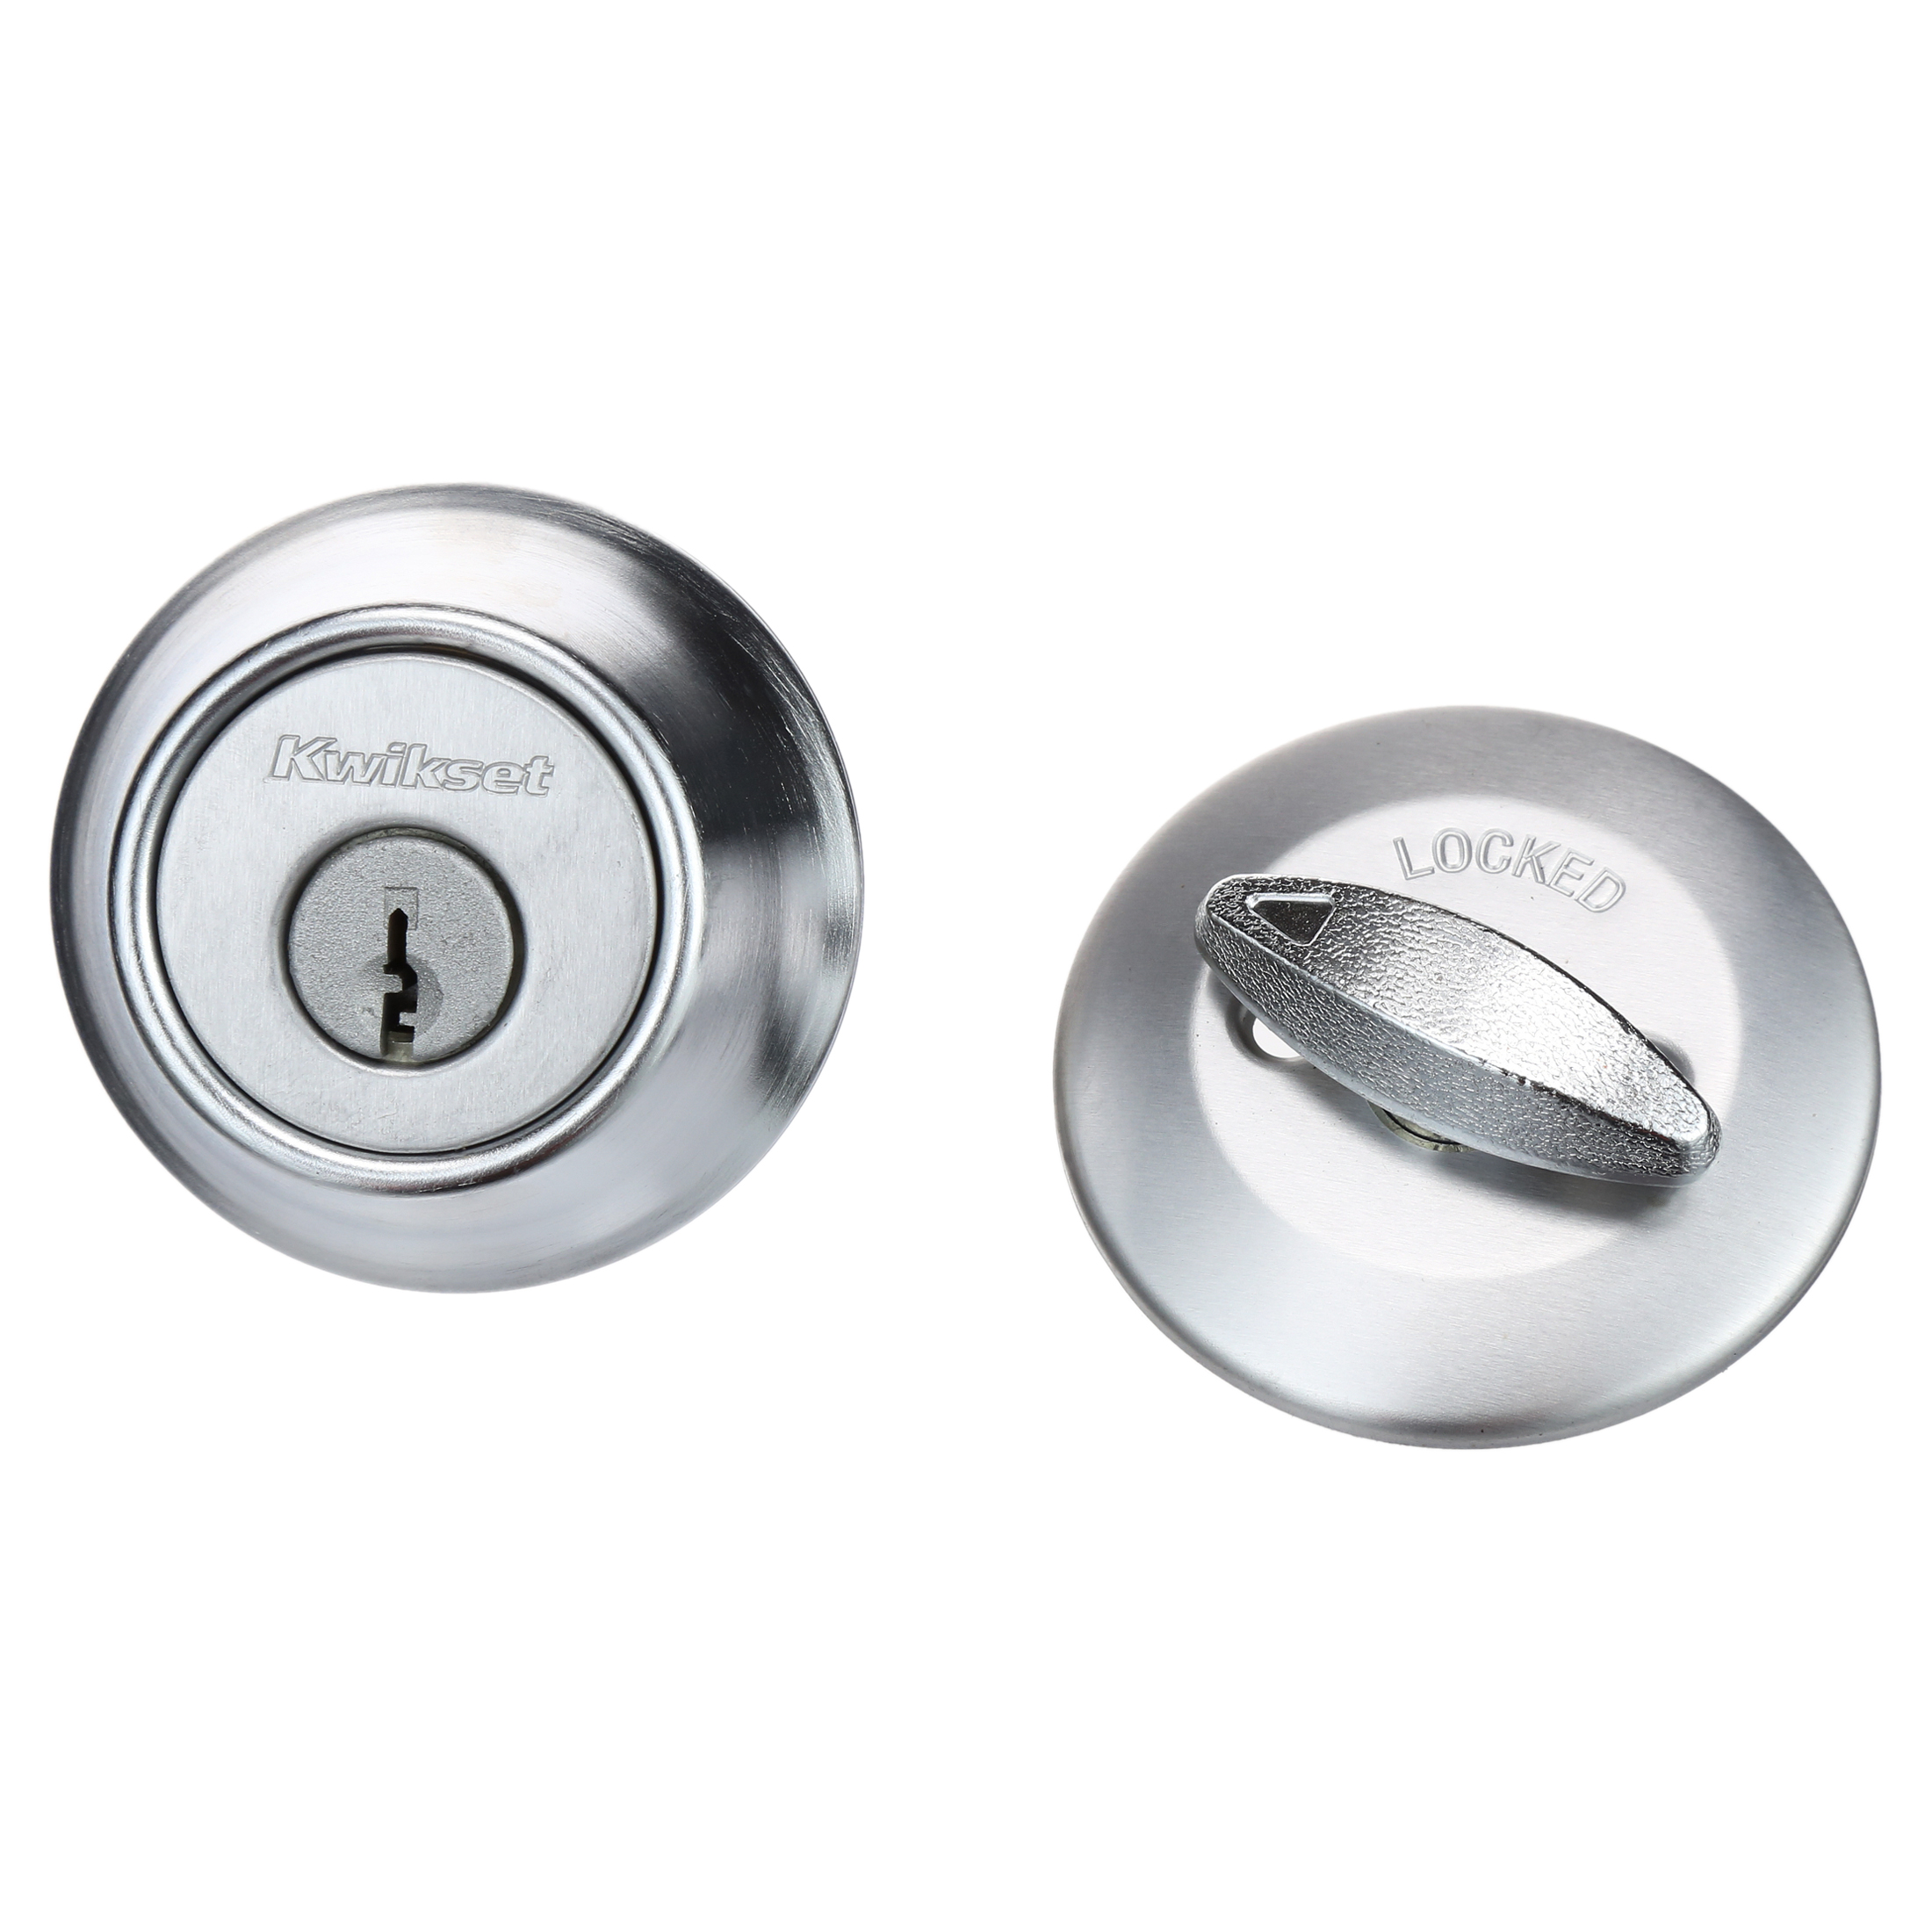 Kwikset 690 Polo Keyed Entry Knob And Sgl Cyl Deadbolt Combo Pack in SC 